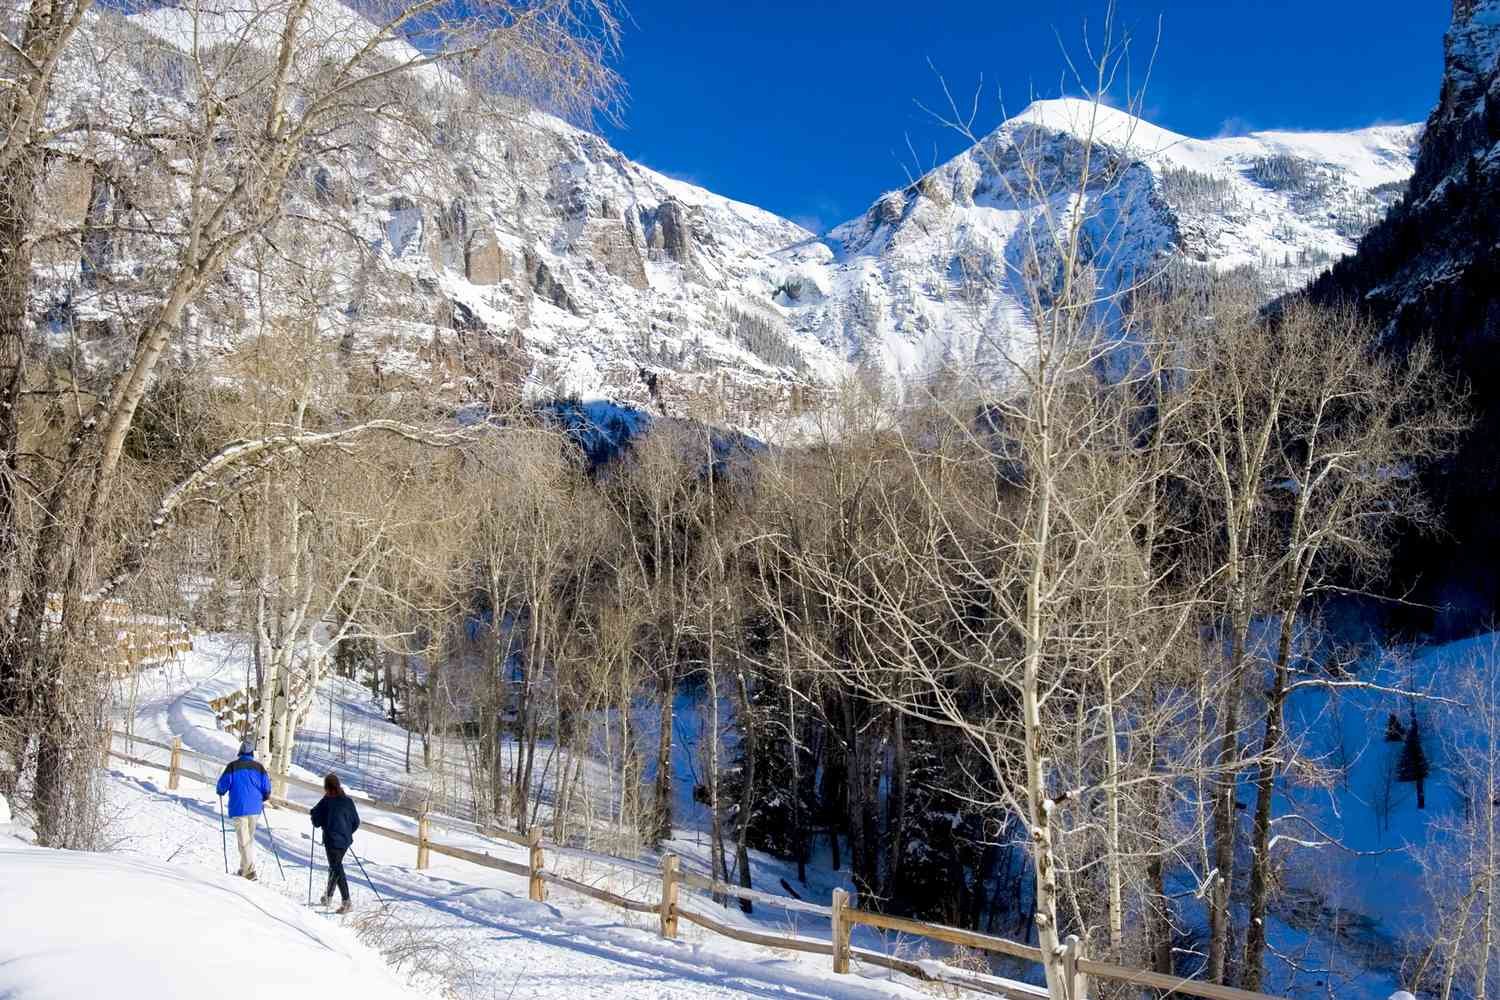 The Best and Most Beautiful Winter Hikes in the U.S.